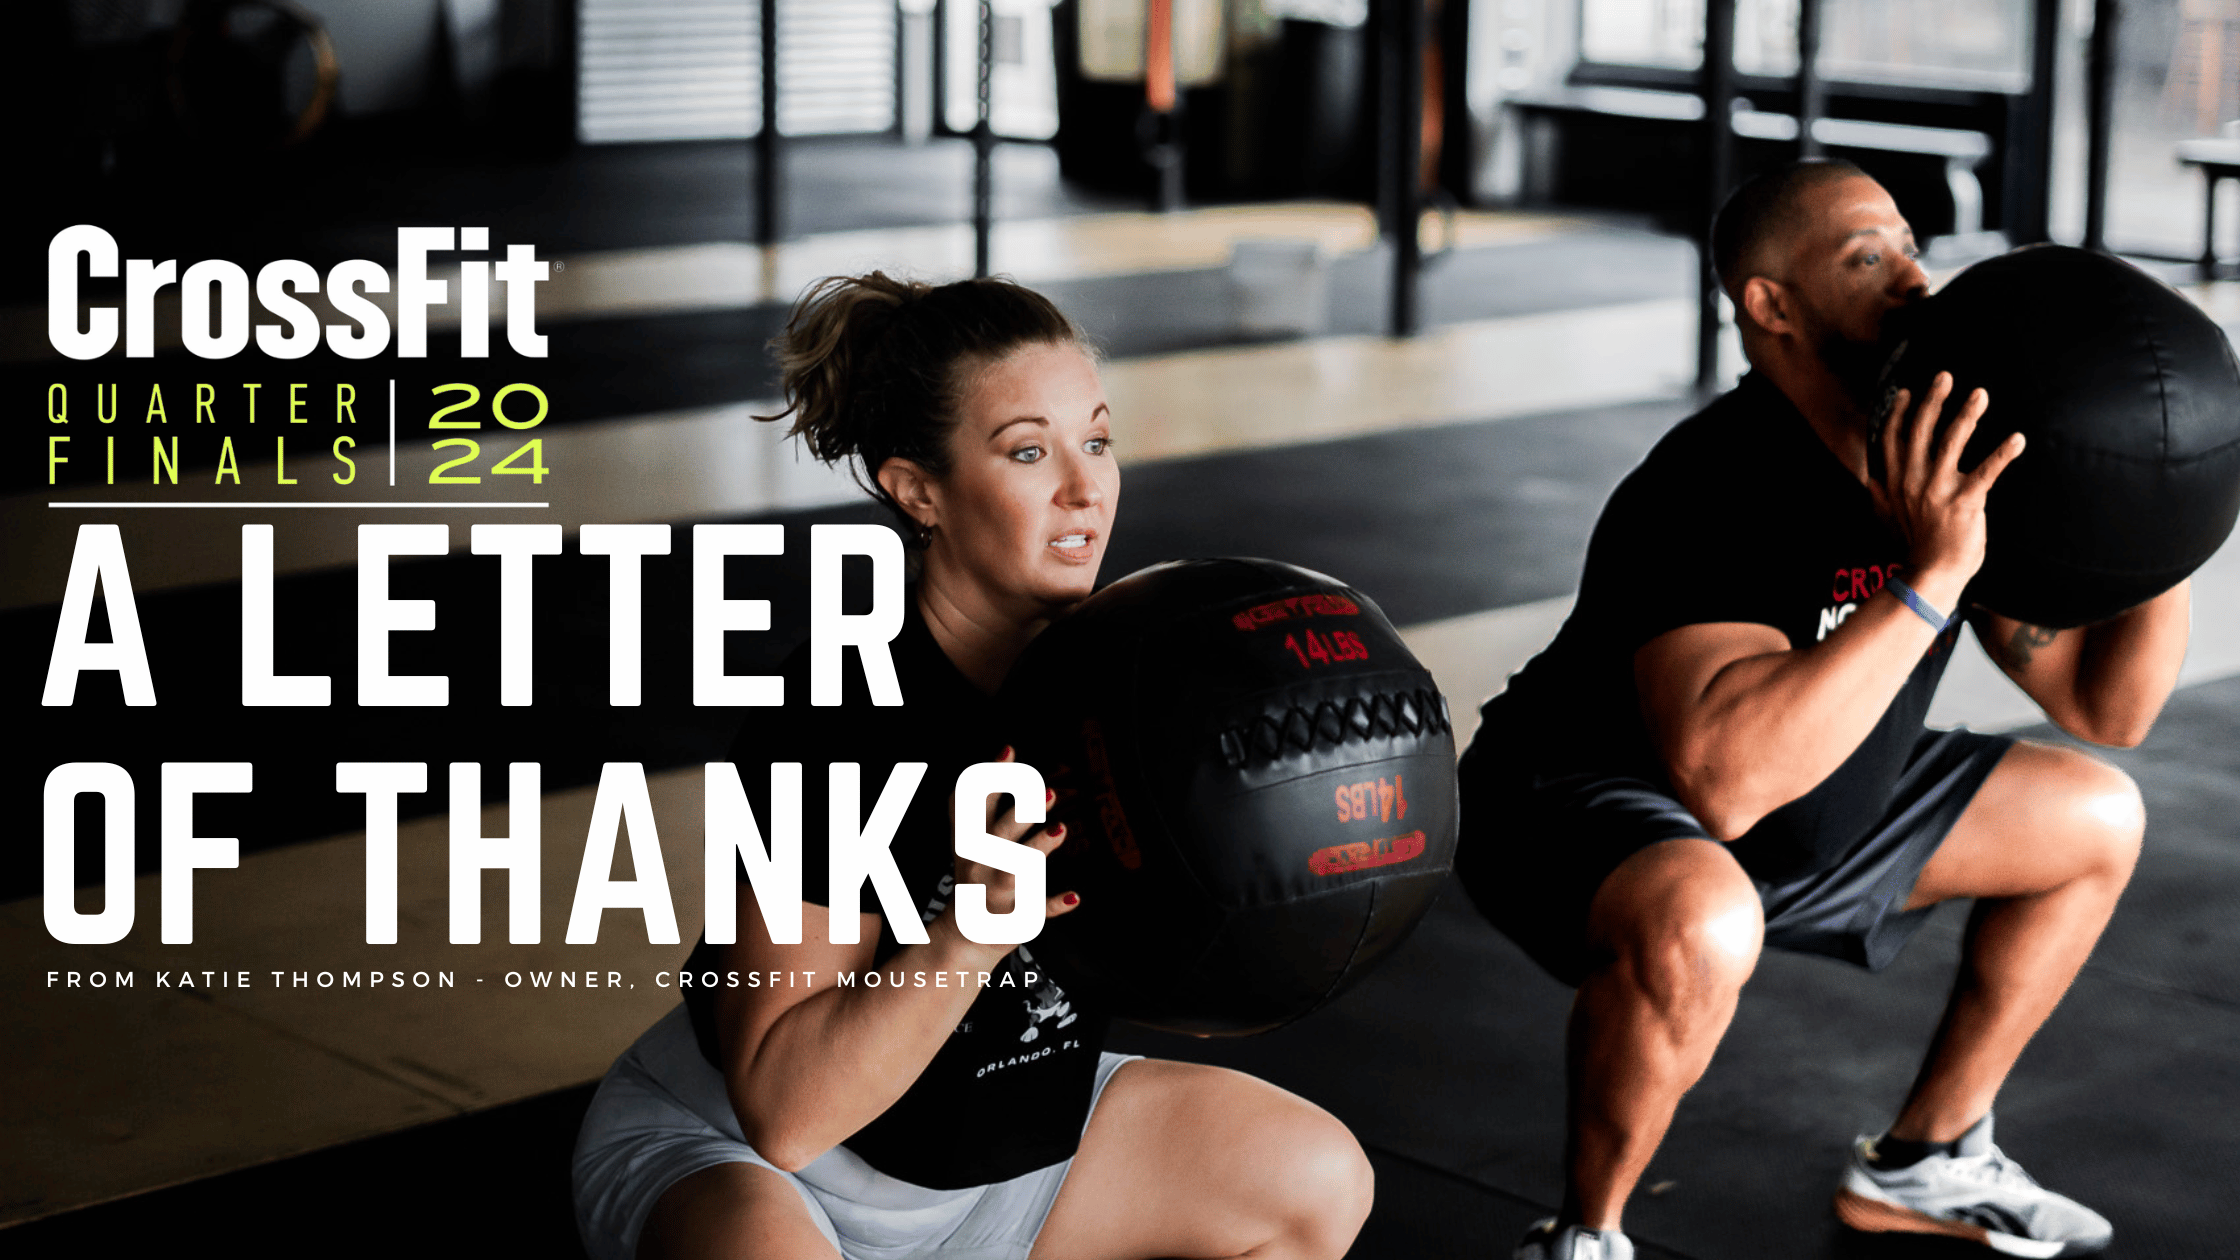 A letter of gratitude to the CrossFit community following the recent Quarterfinals events.